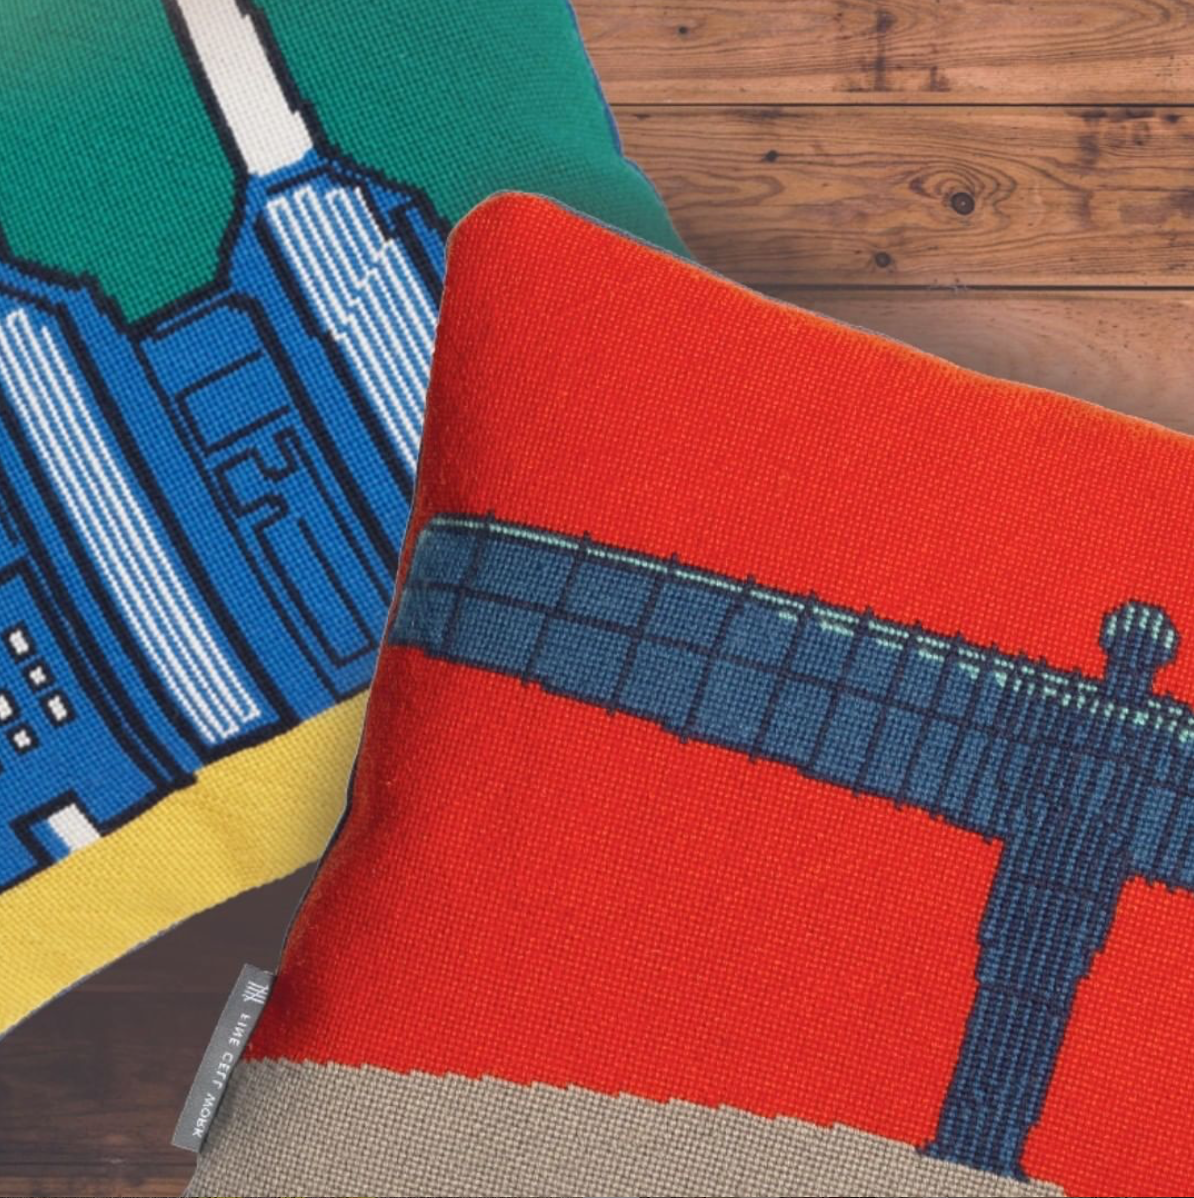 Fine-Cell-Work-Landmark-Cushions-Angel-of-the-North-Battersea-Power-Station-London.png